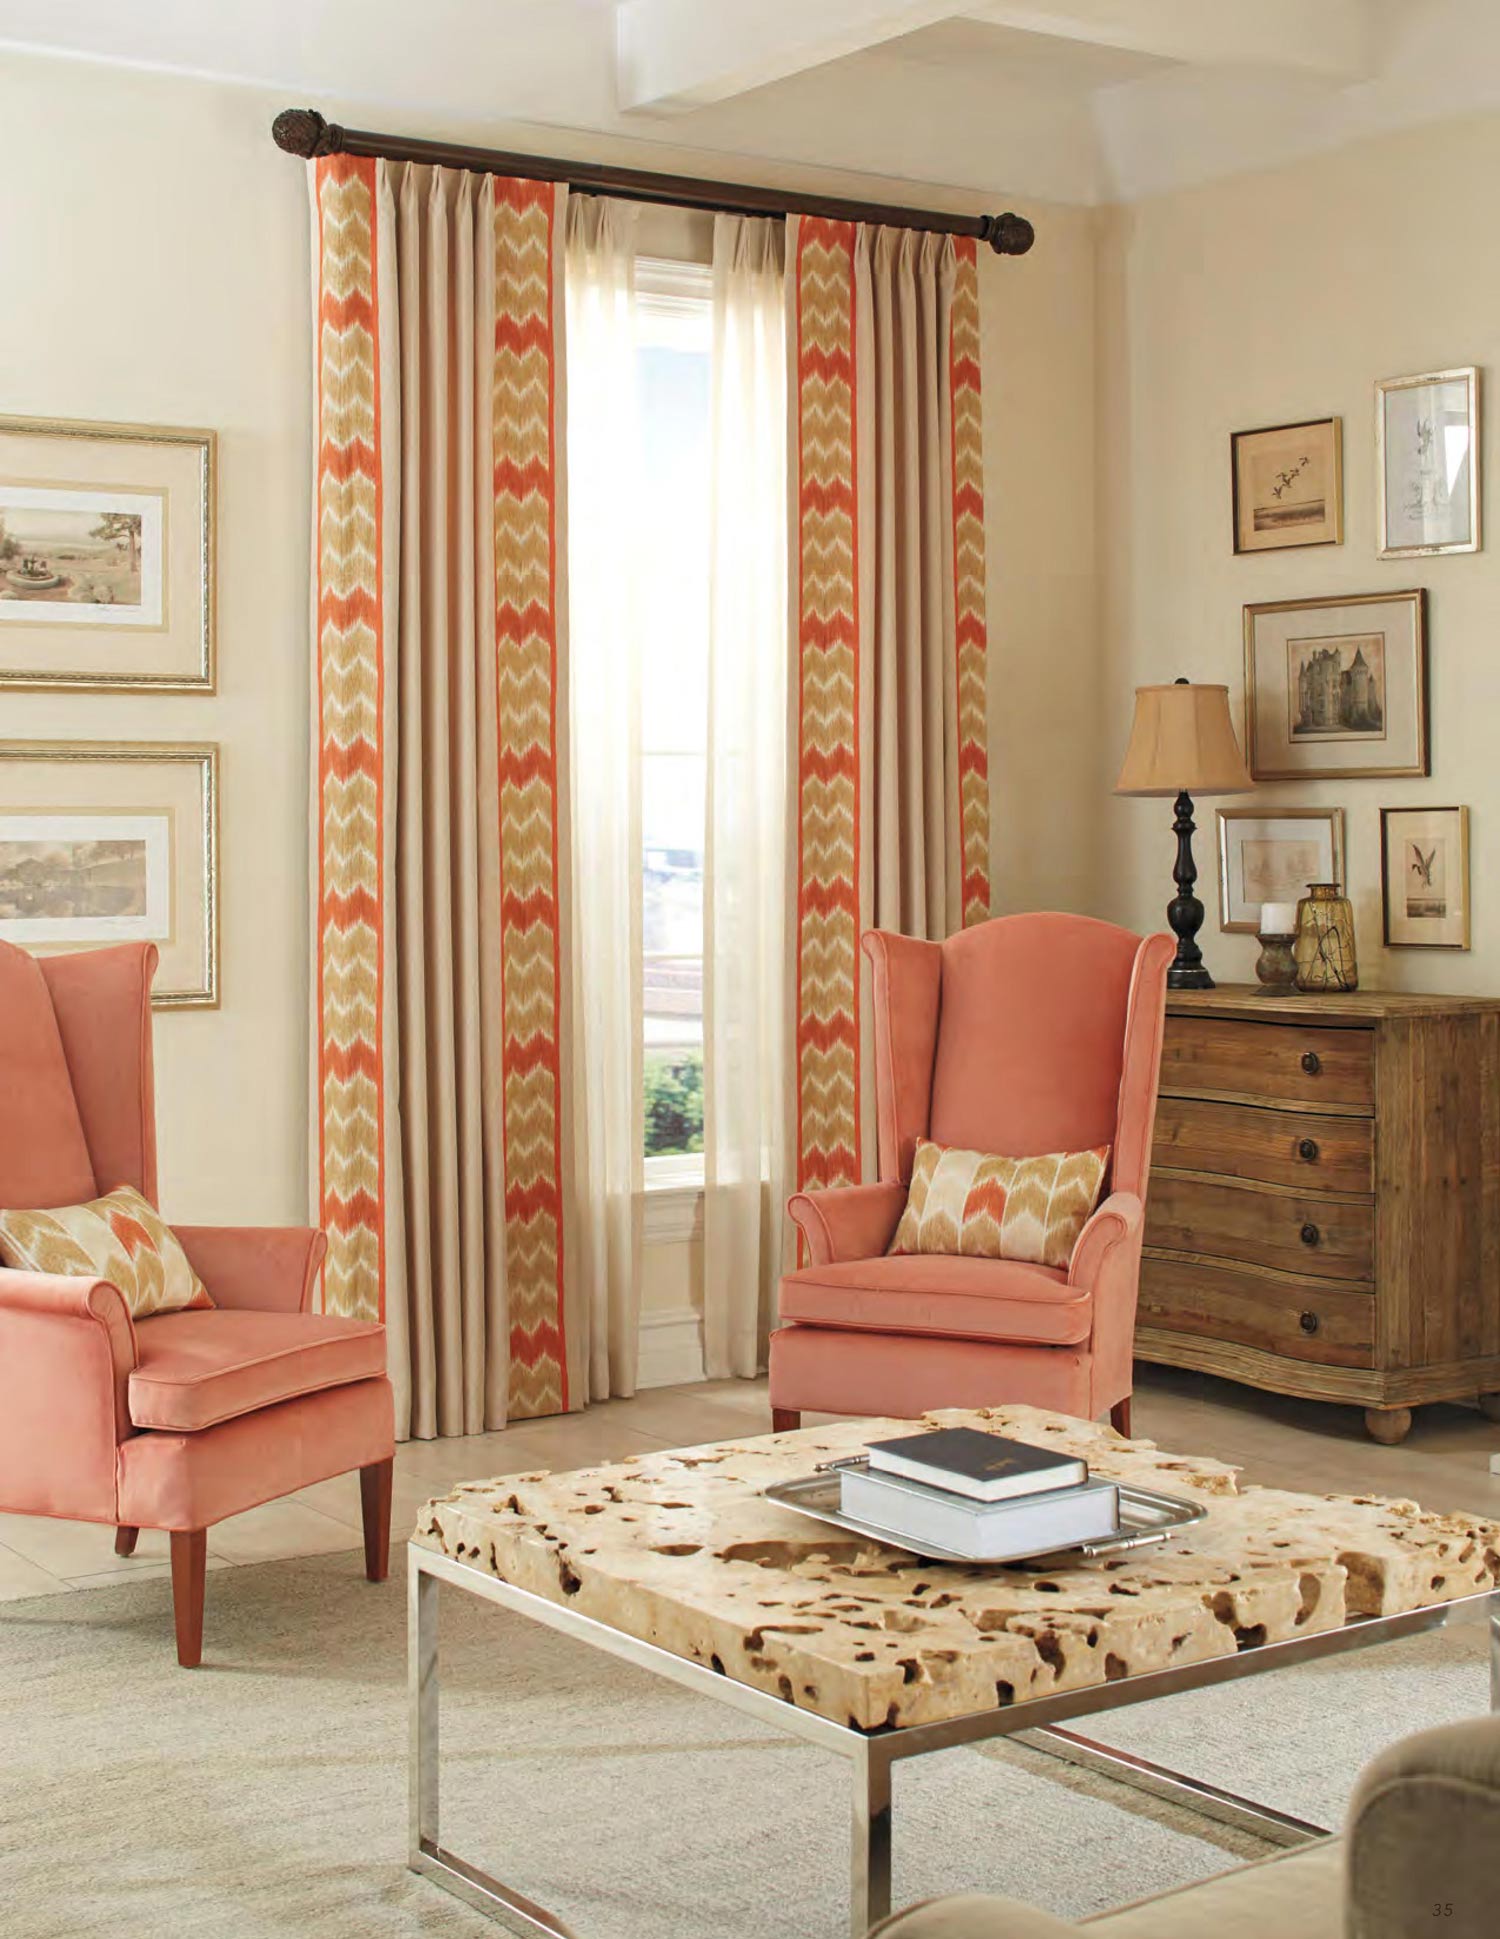 Euro Pleat Drapery - Traditional Living Room - Khaki Drapes with Coral Tape Banding in Mission Viejo